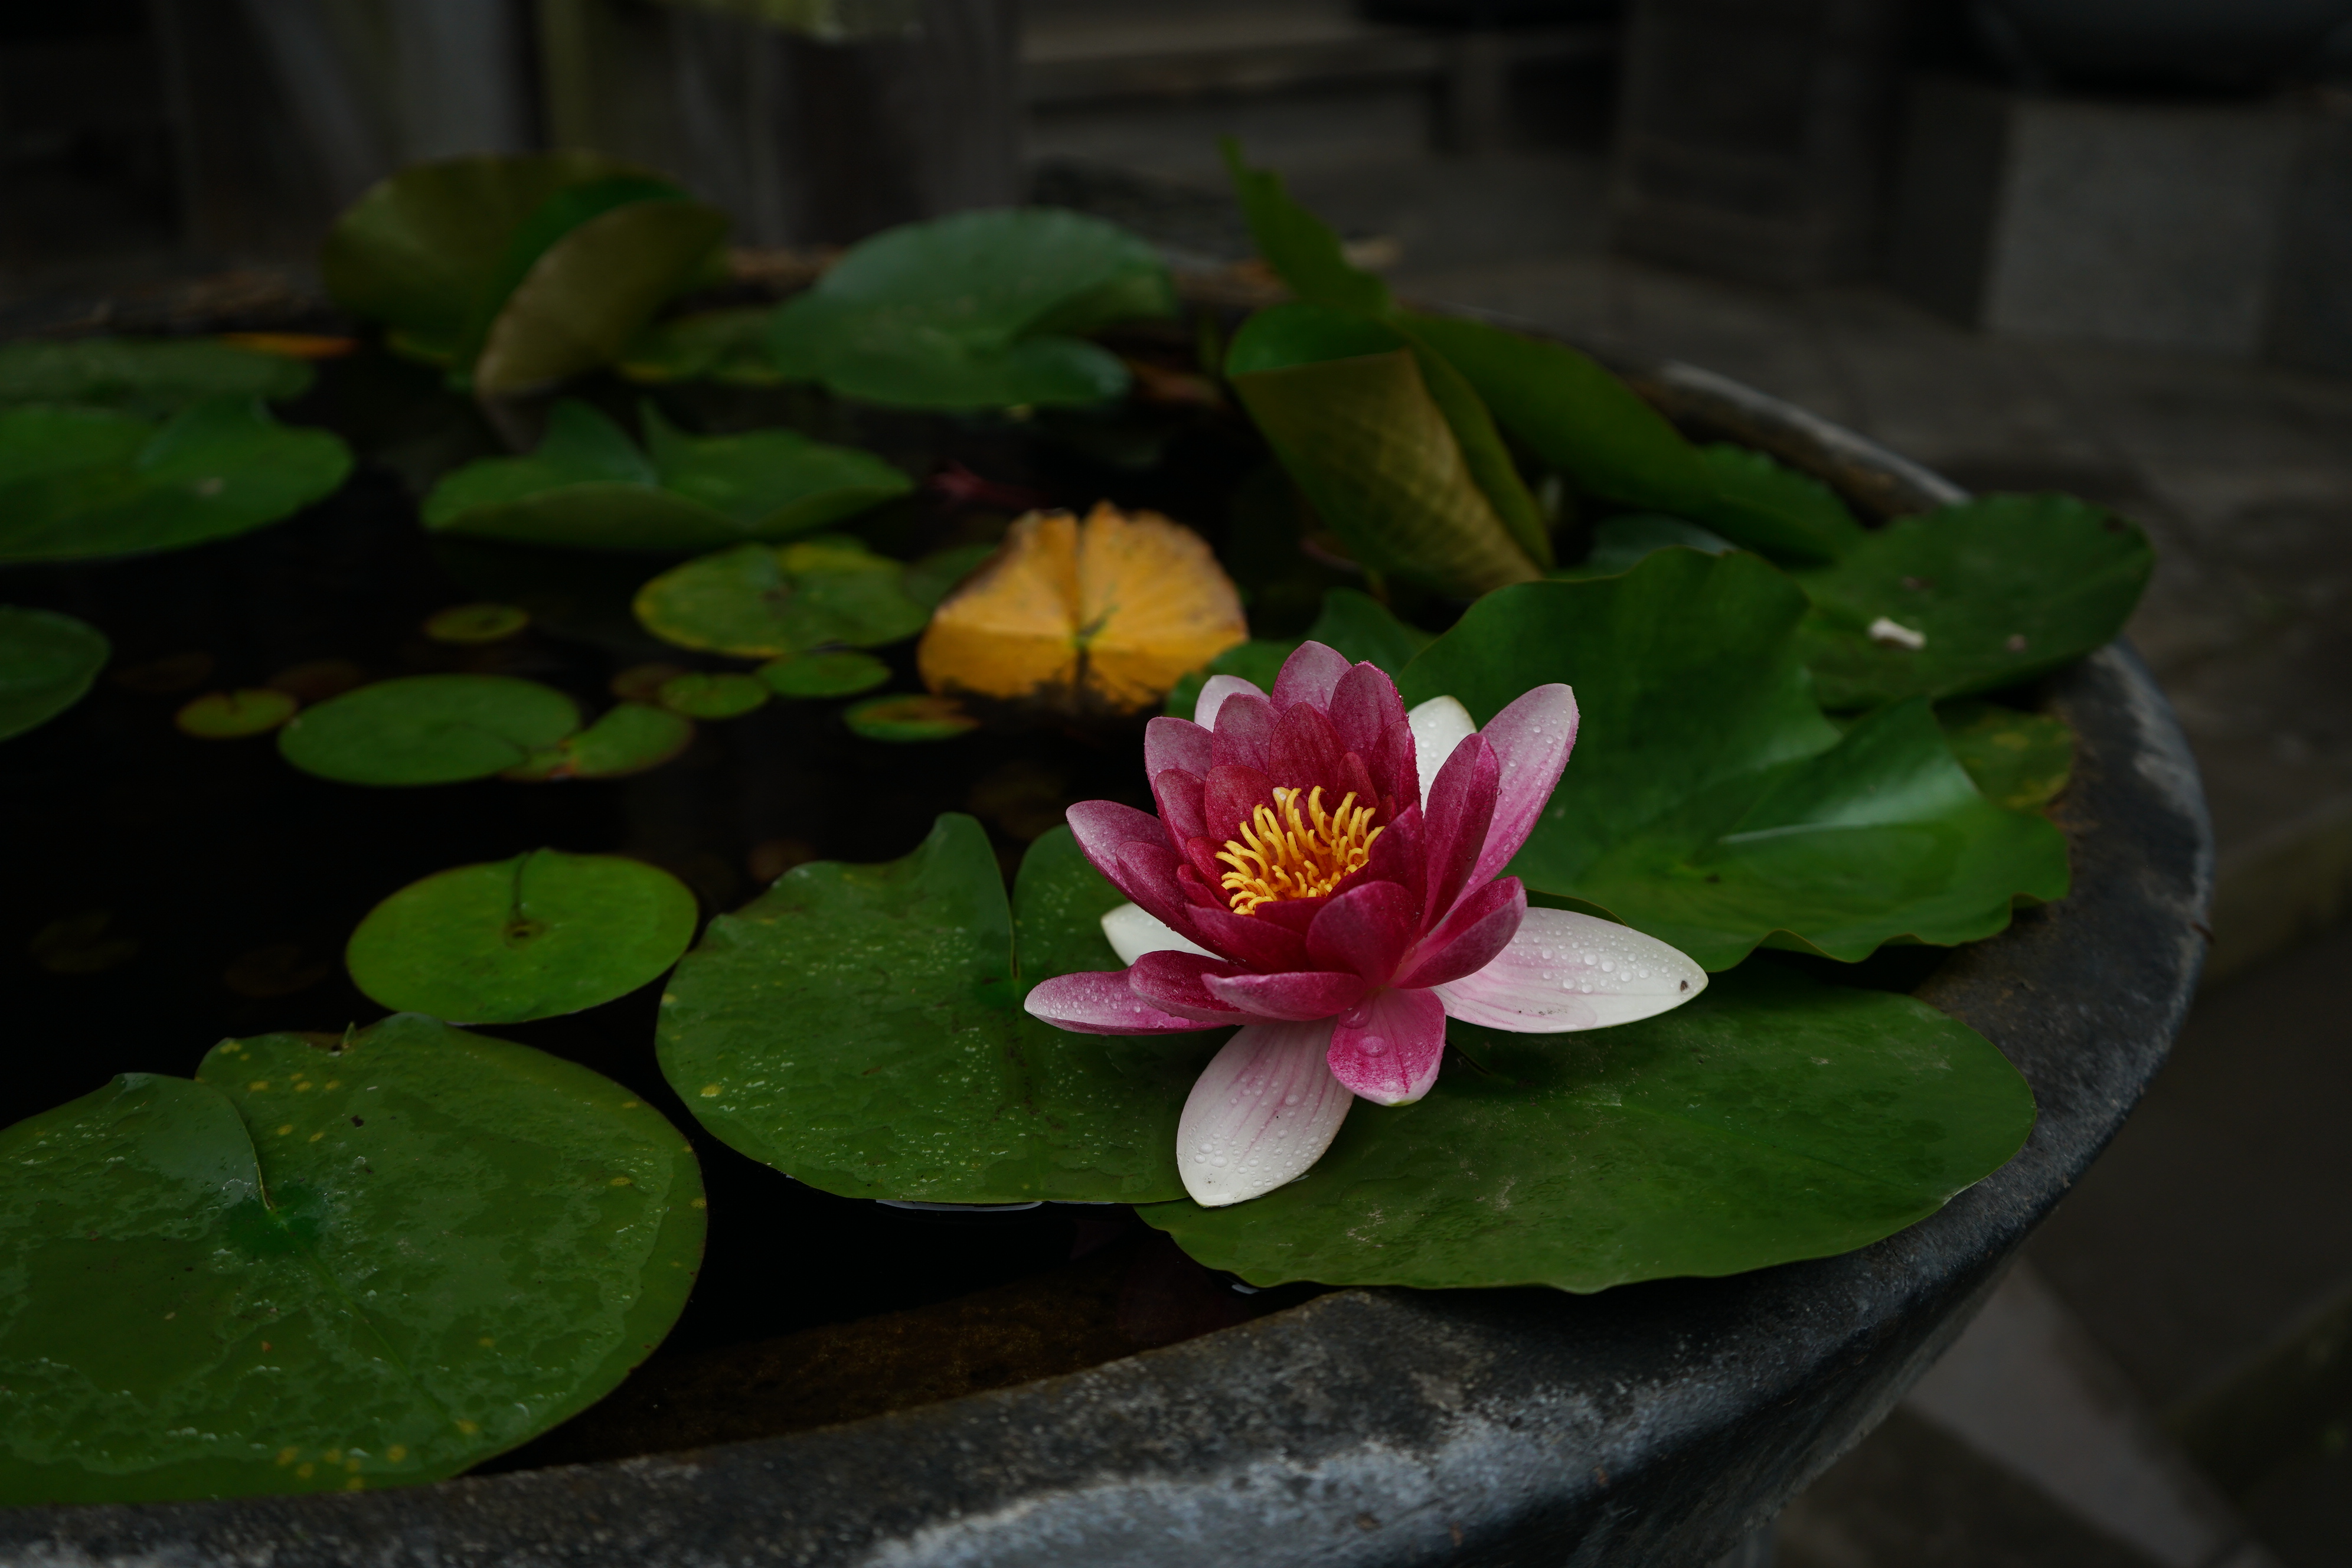 A waterlily after rain